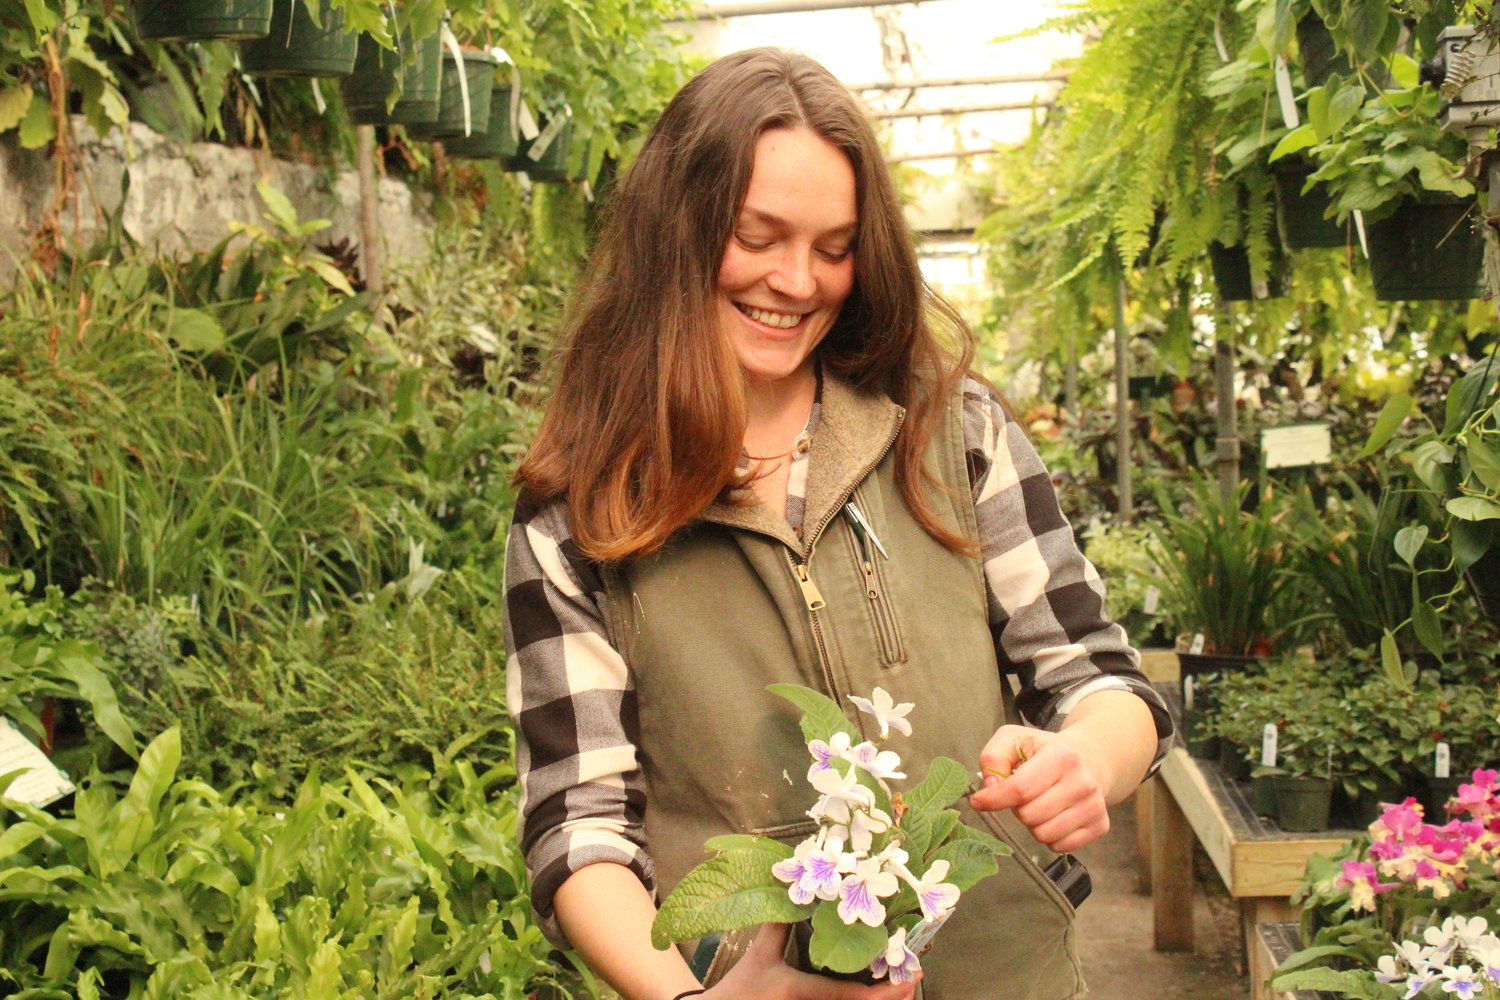 Carley Peckham, who now serves as full-time manager, grew up at the greenhouse her parents, Rick and Laura Peckham, own. "I really feel like the luckiest girl in the world," she says.